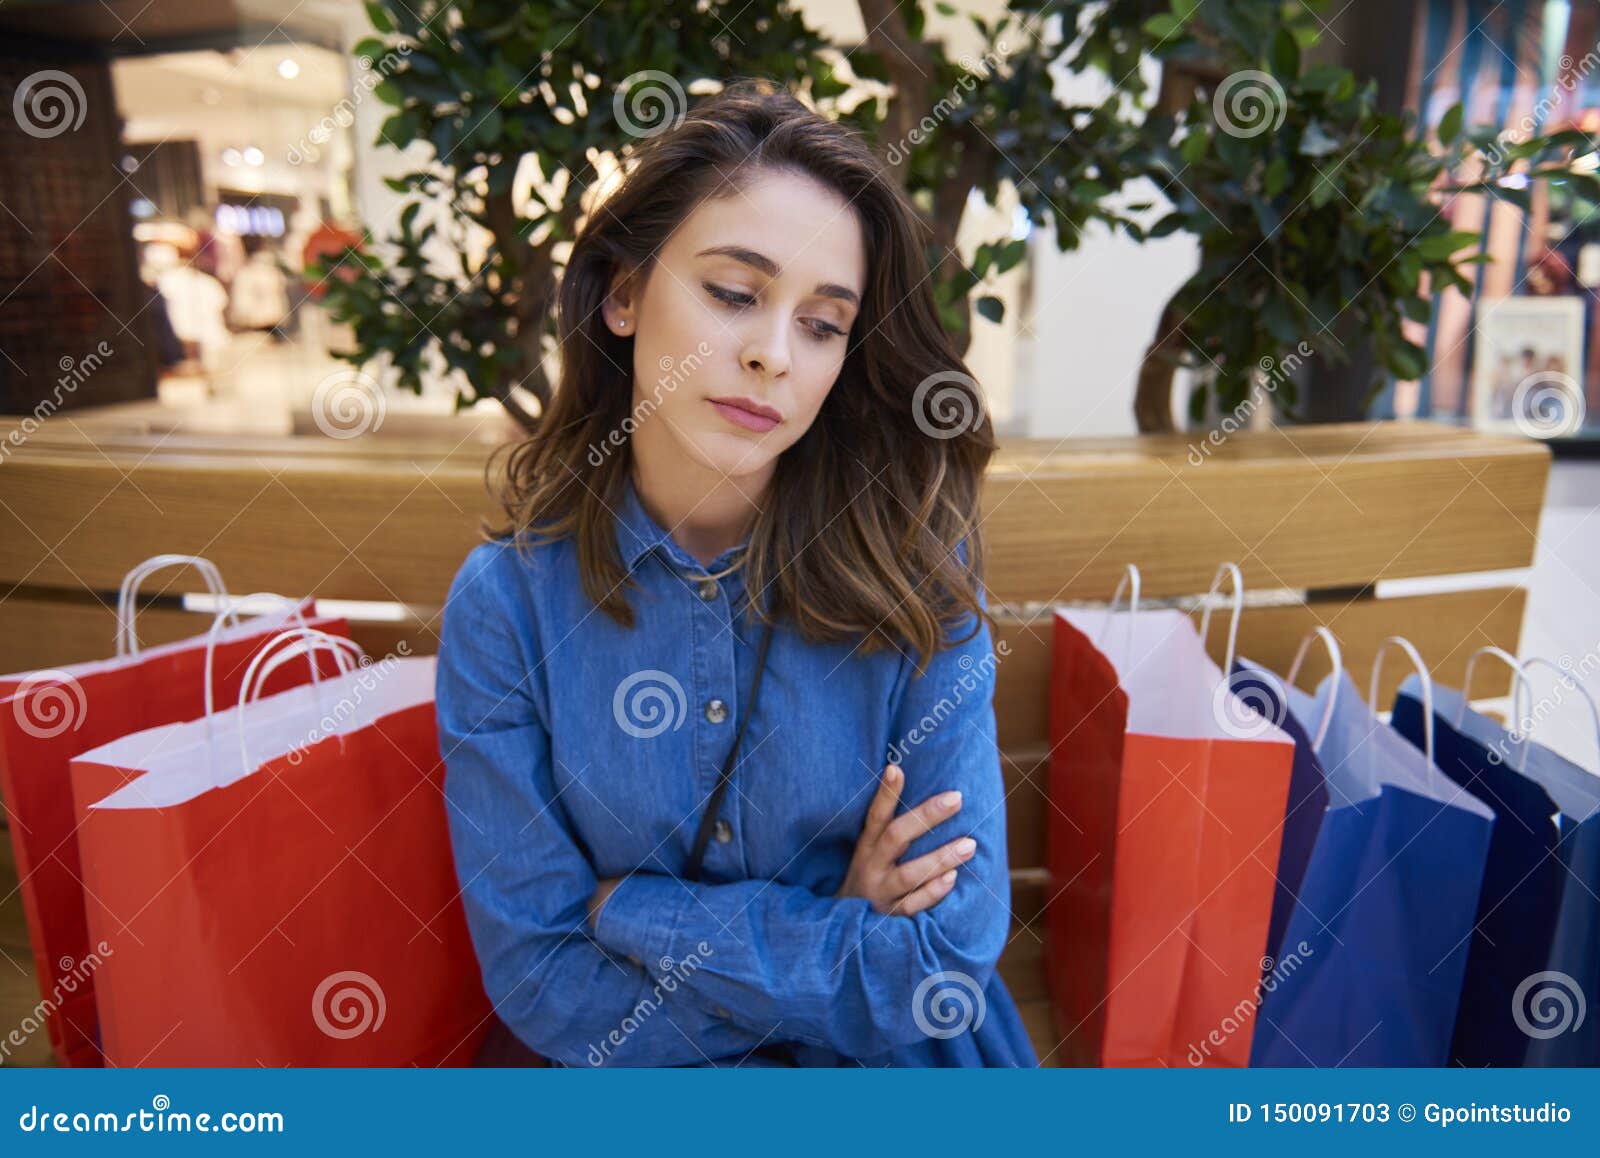 sad woman spent all her money during big shopping